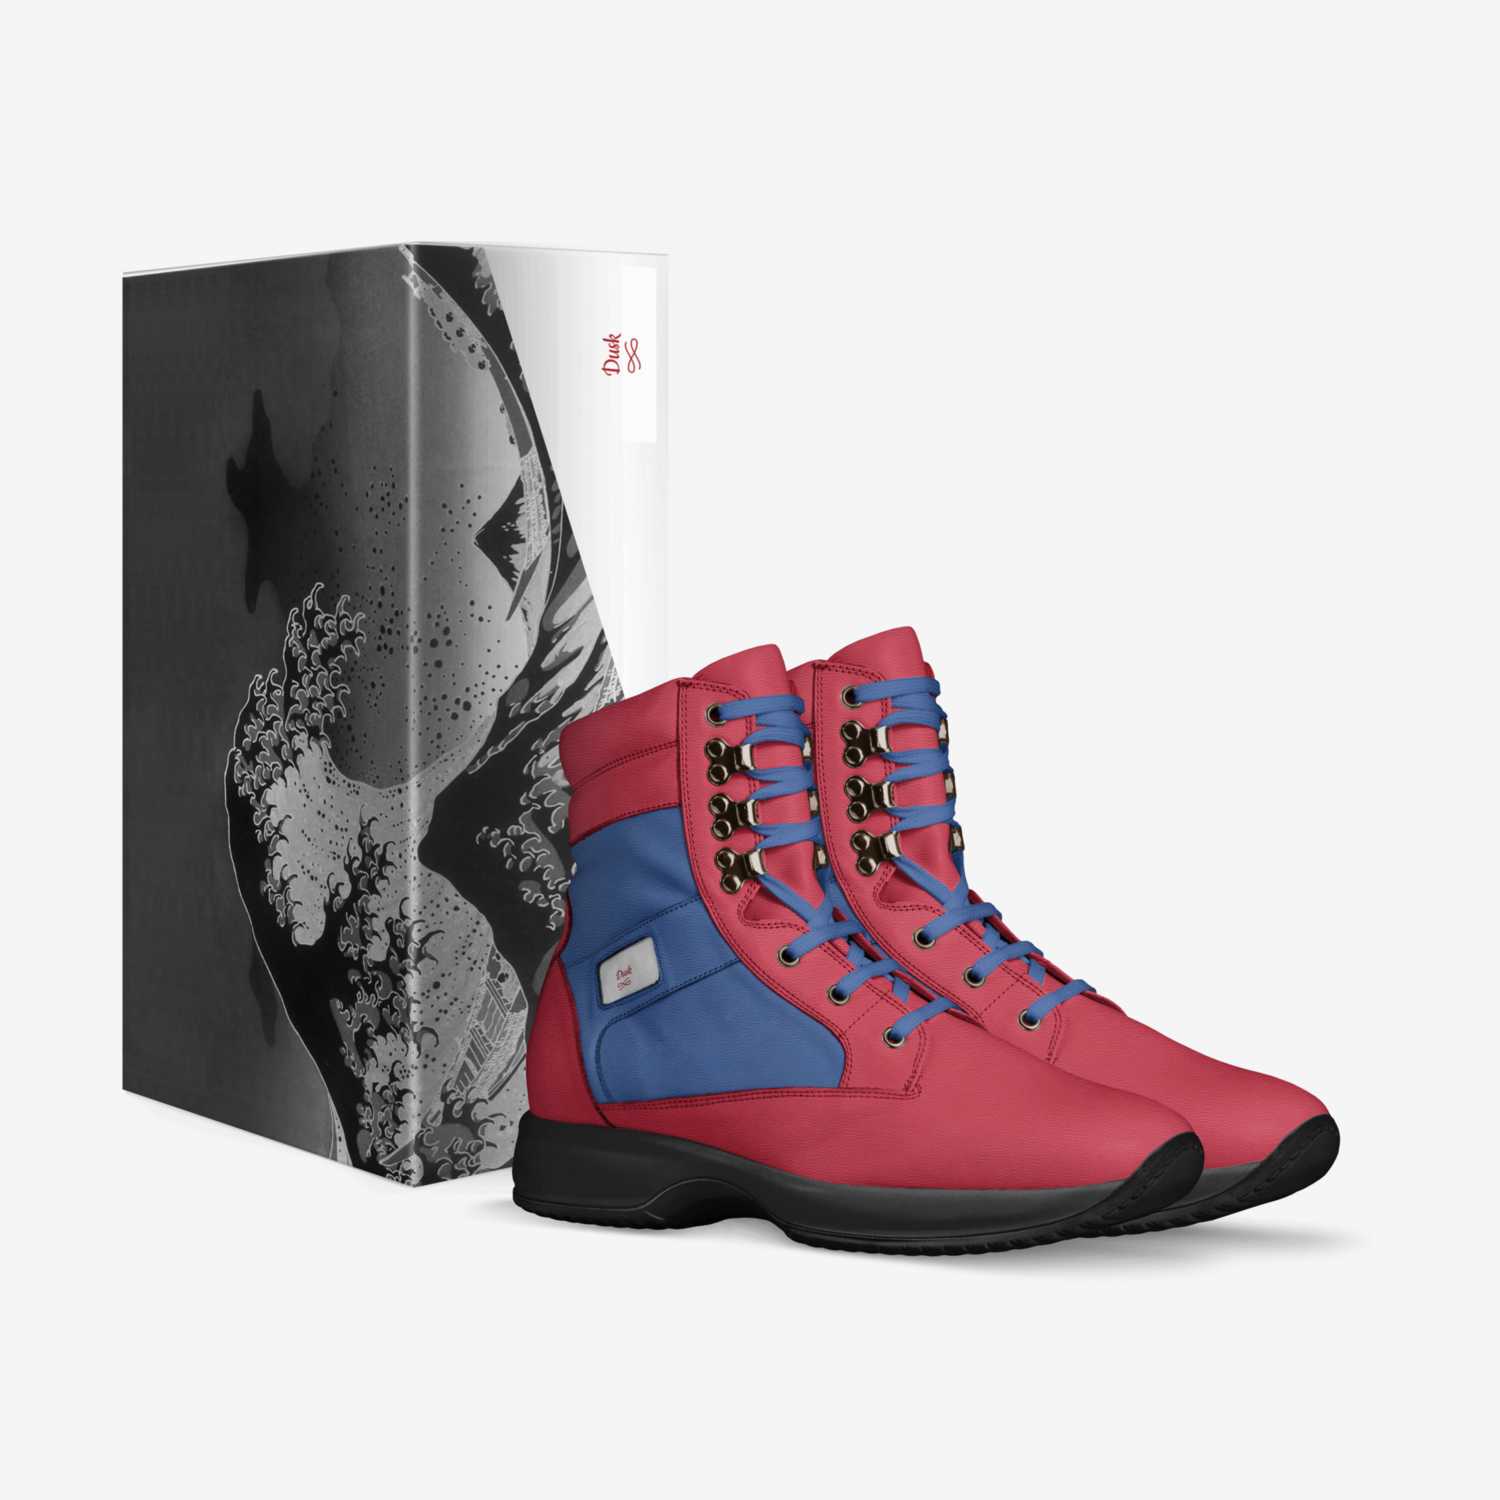 Dusk custom made in Italy shoes by Alex Zavala | Box view